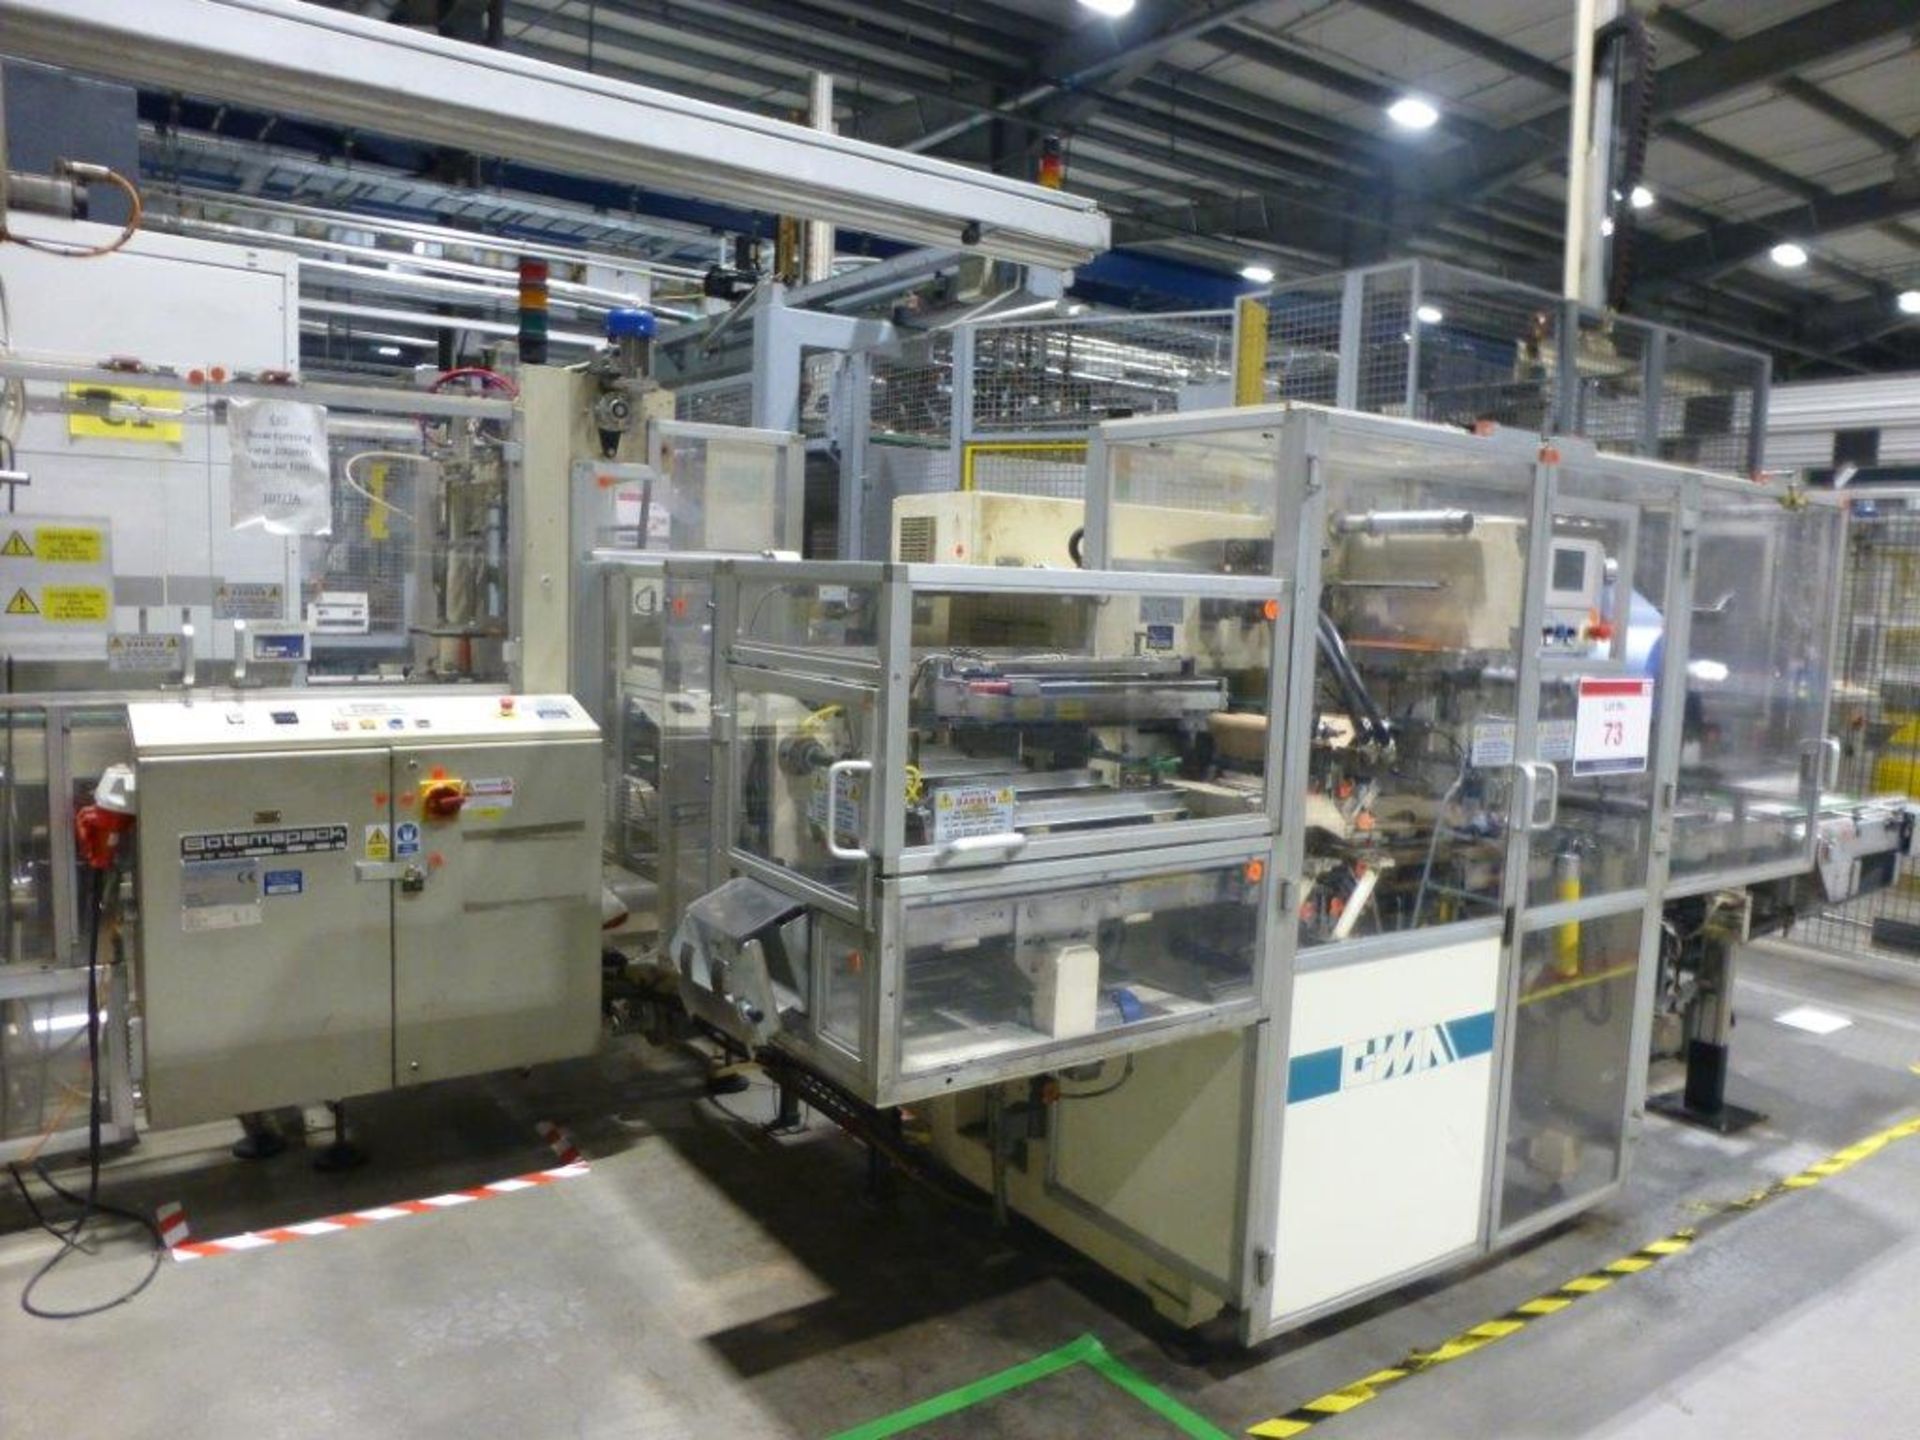 GIMA Type 884 DVD CNC Rotary Thermal Welding Machine Serial No. 88442CO (2002) with flip unit and - Image 2 of 4